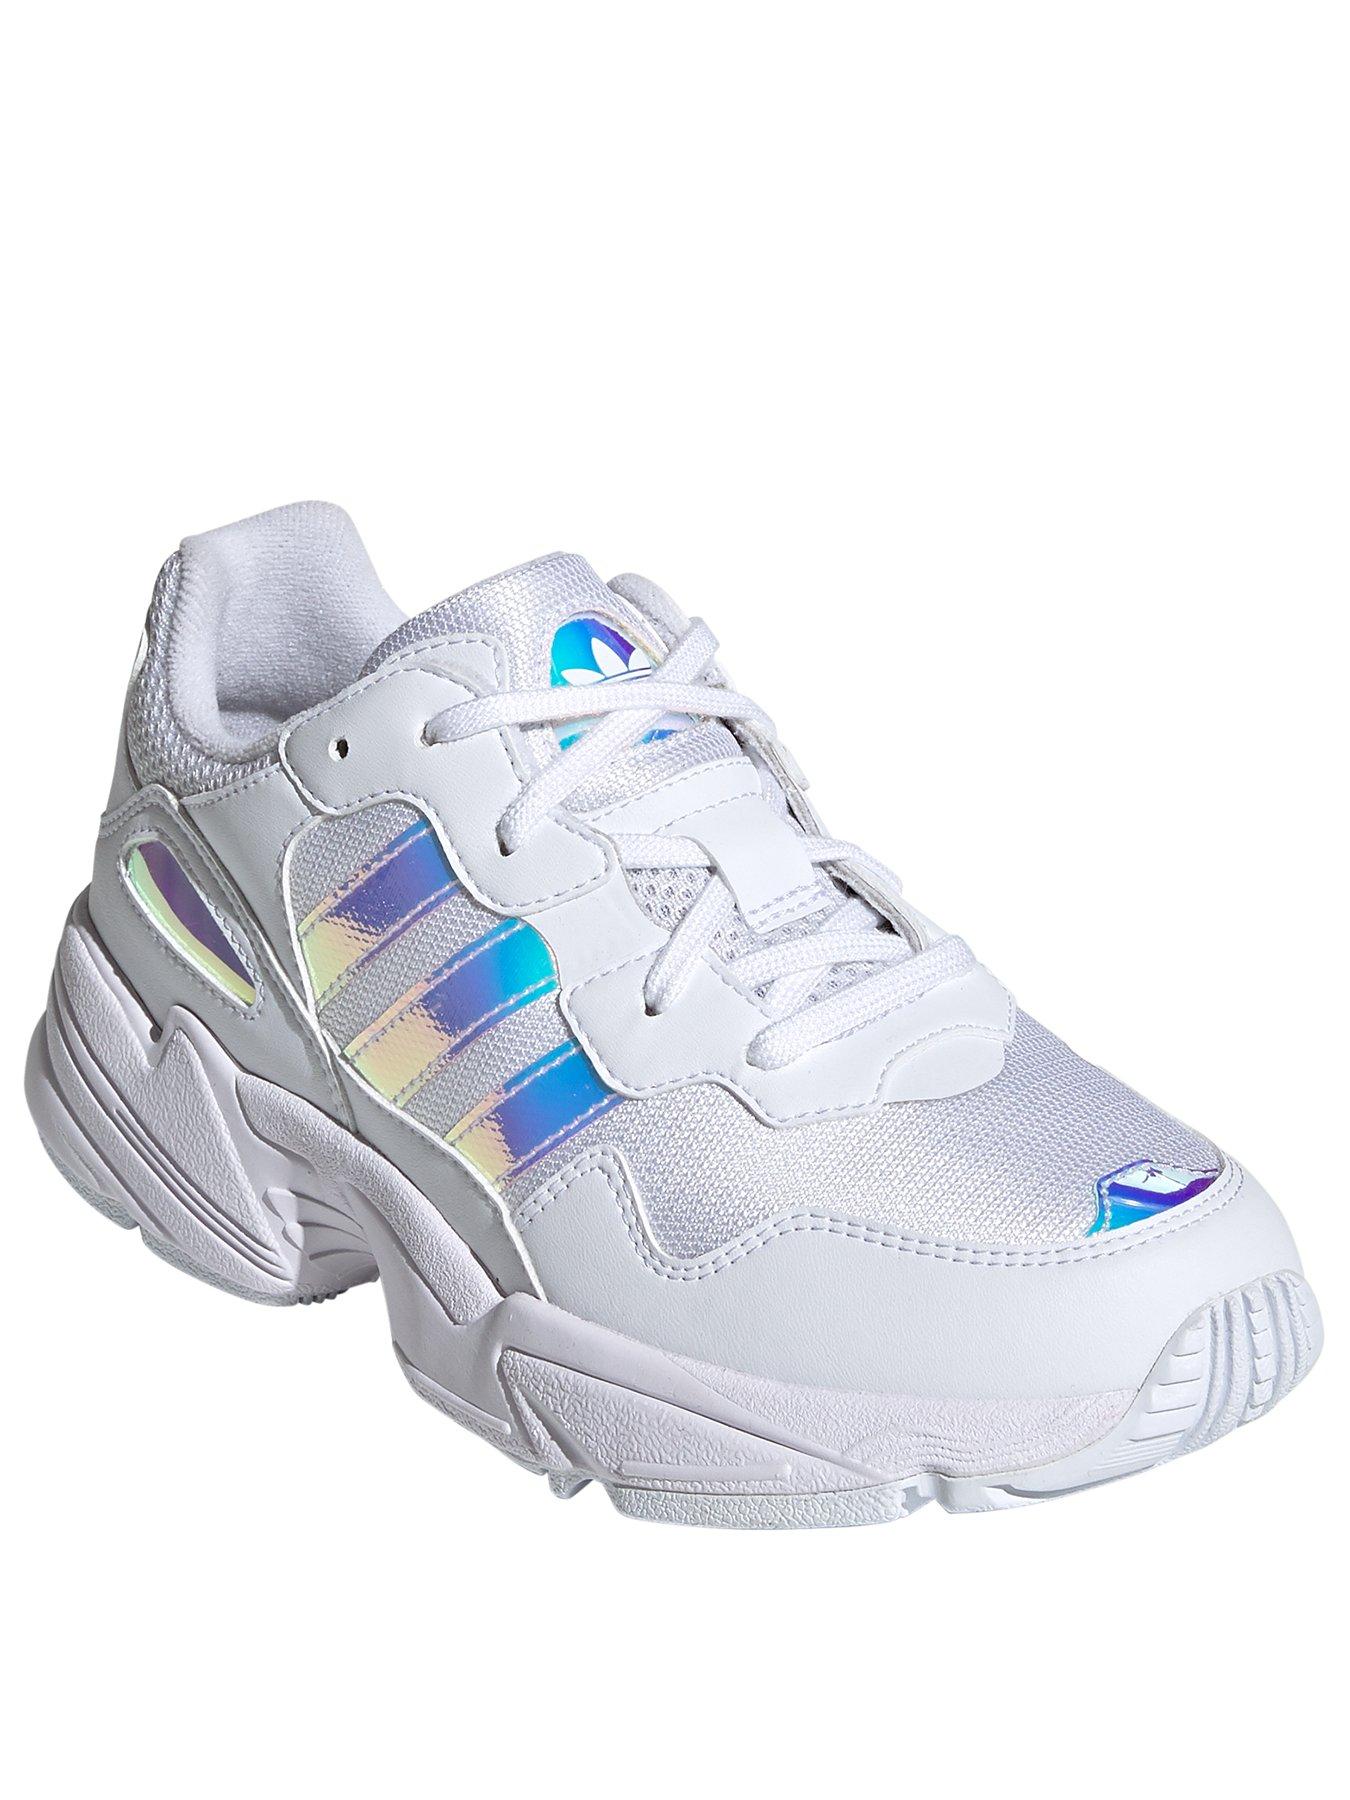 adidas holographic trainers